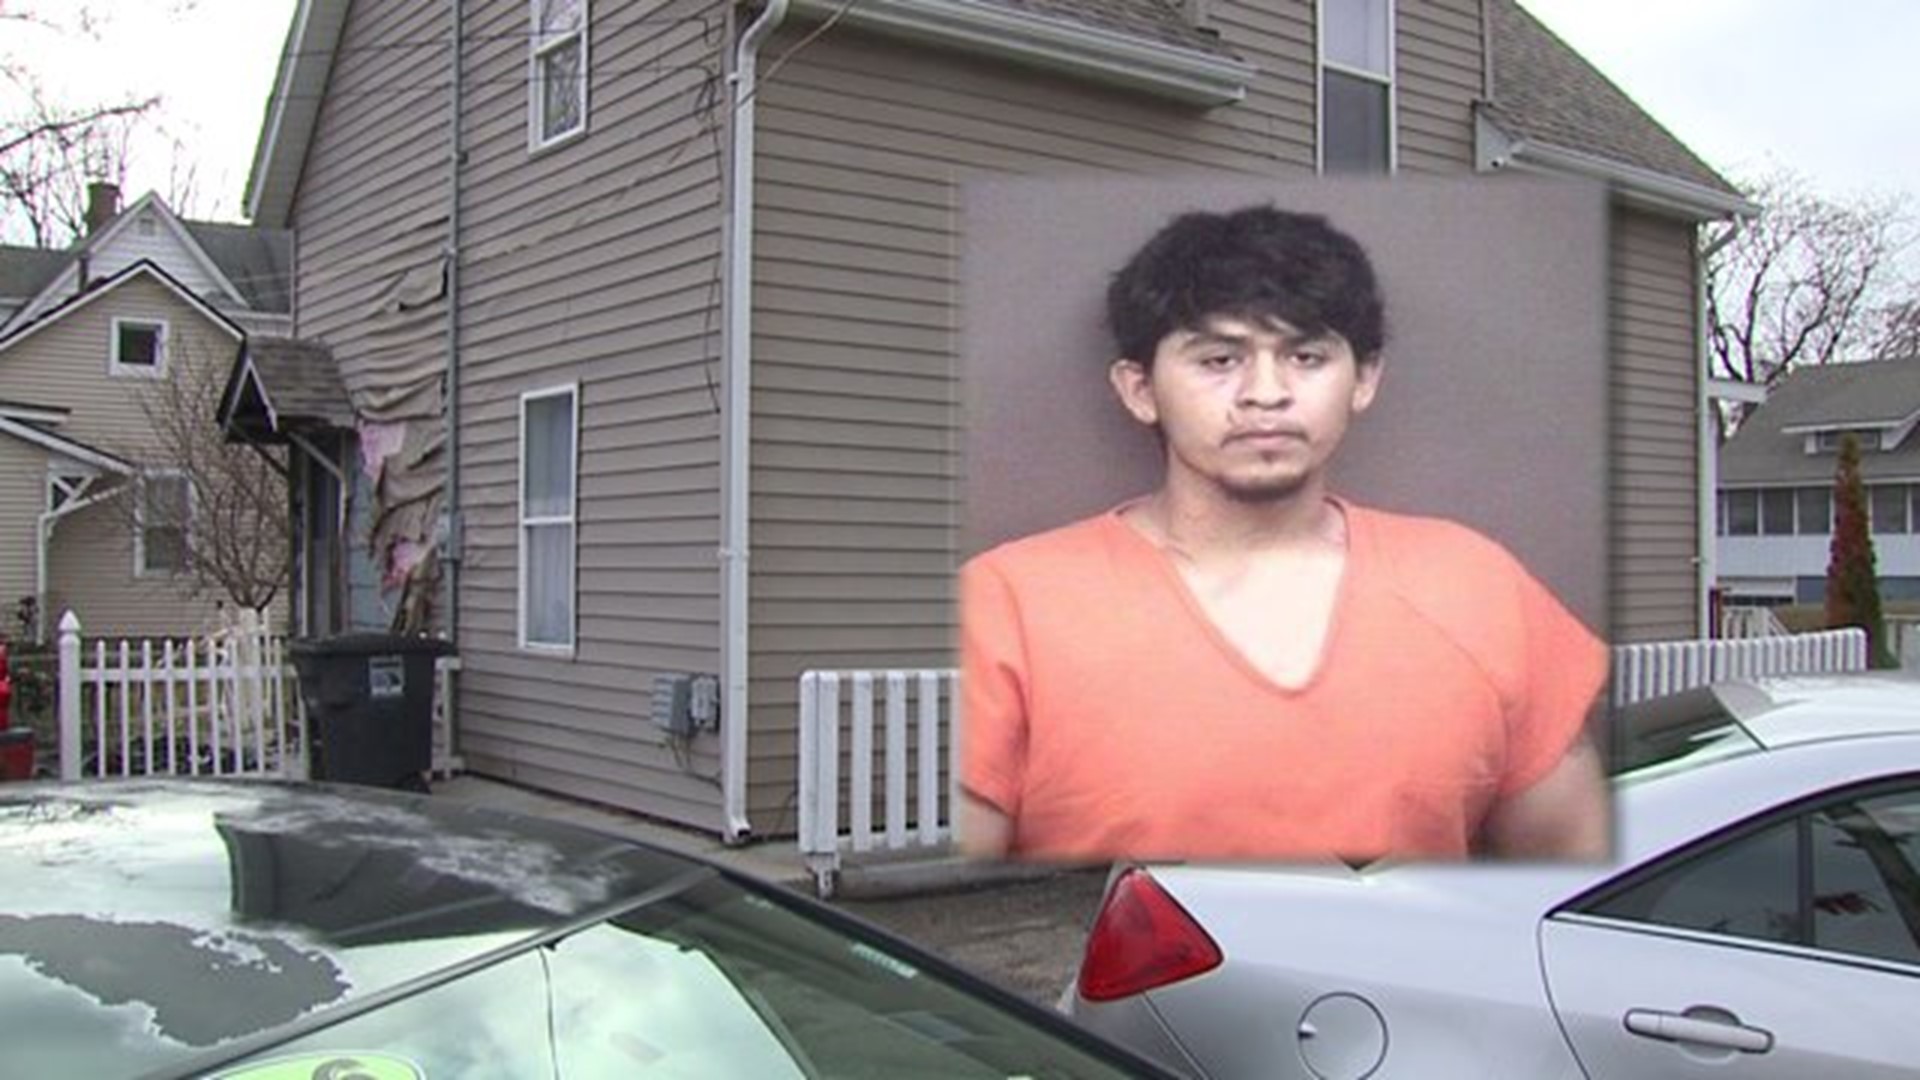 Moline PD searching for suspect in home invasion and arson